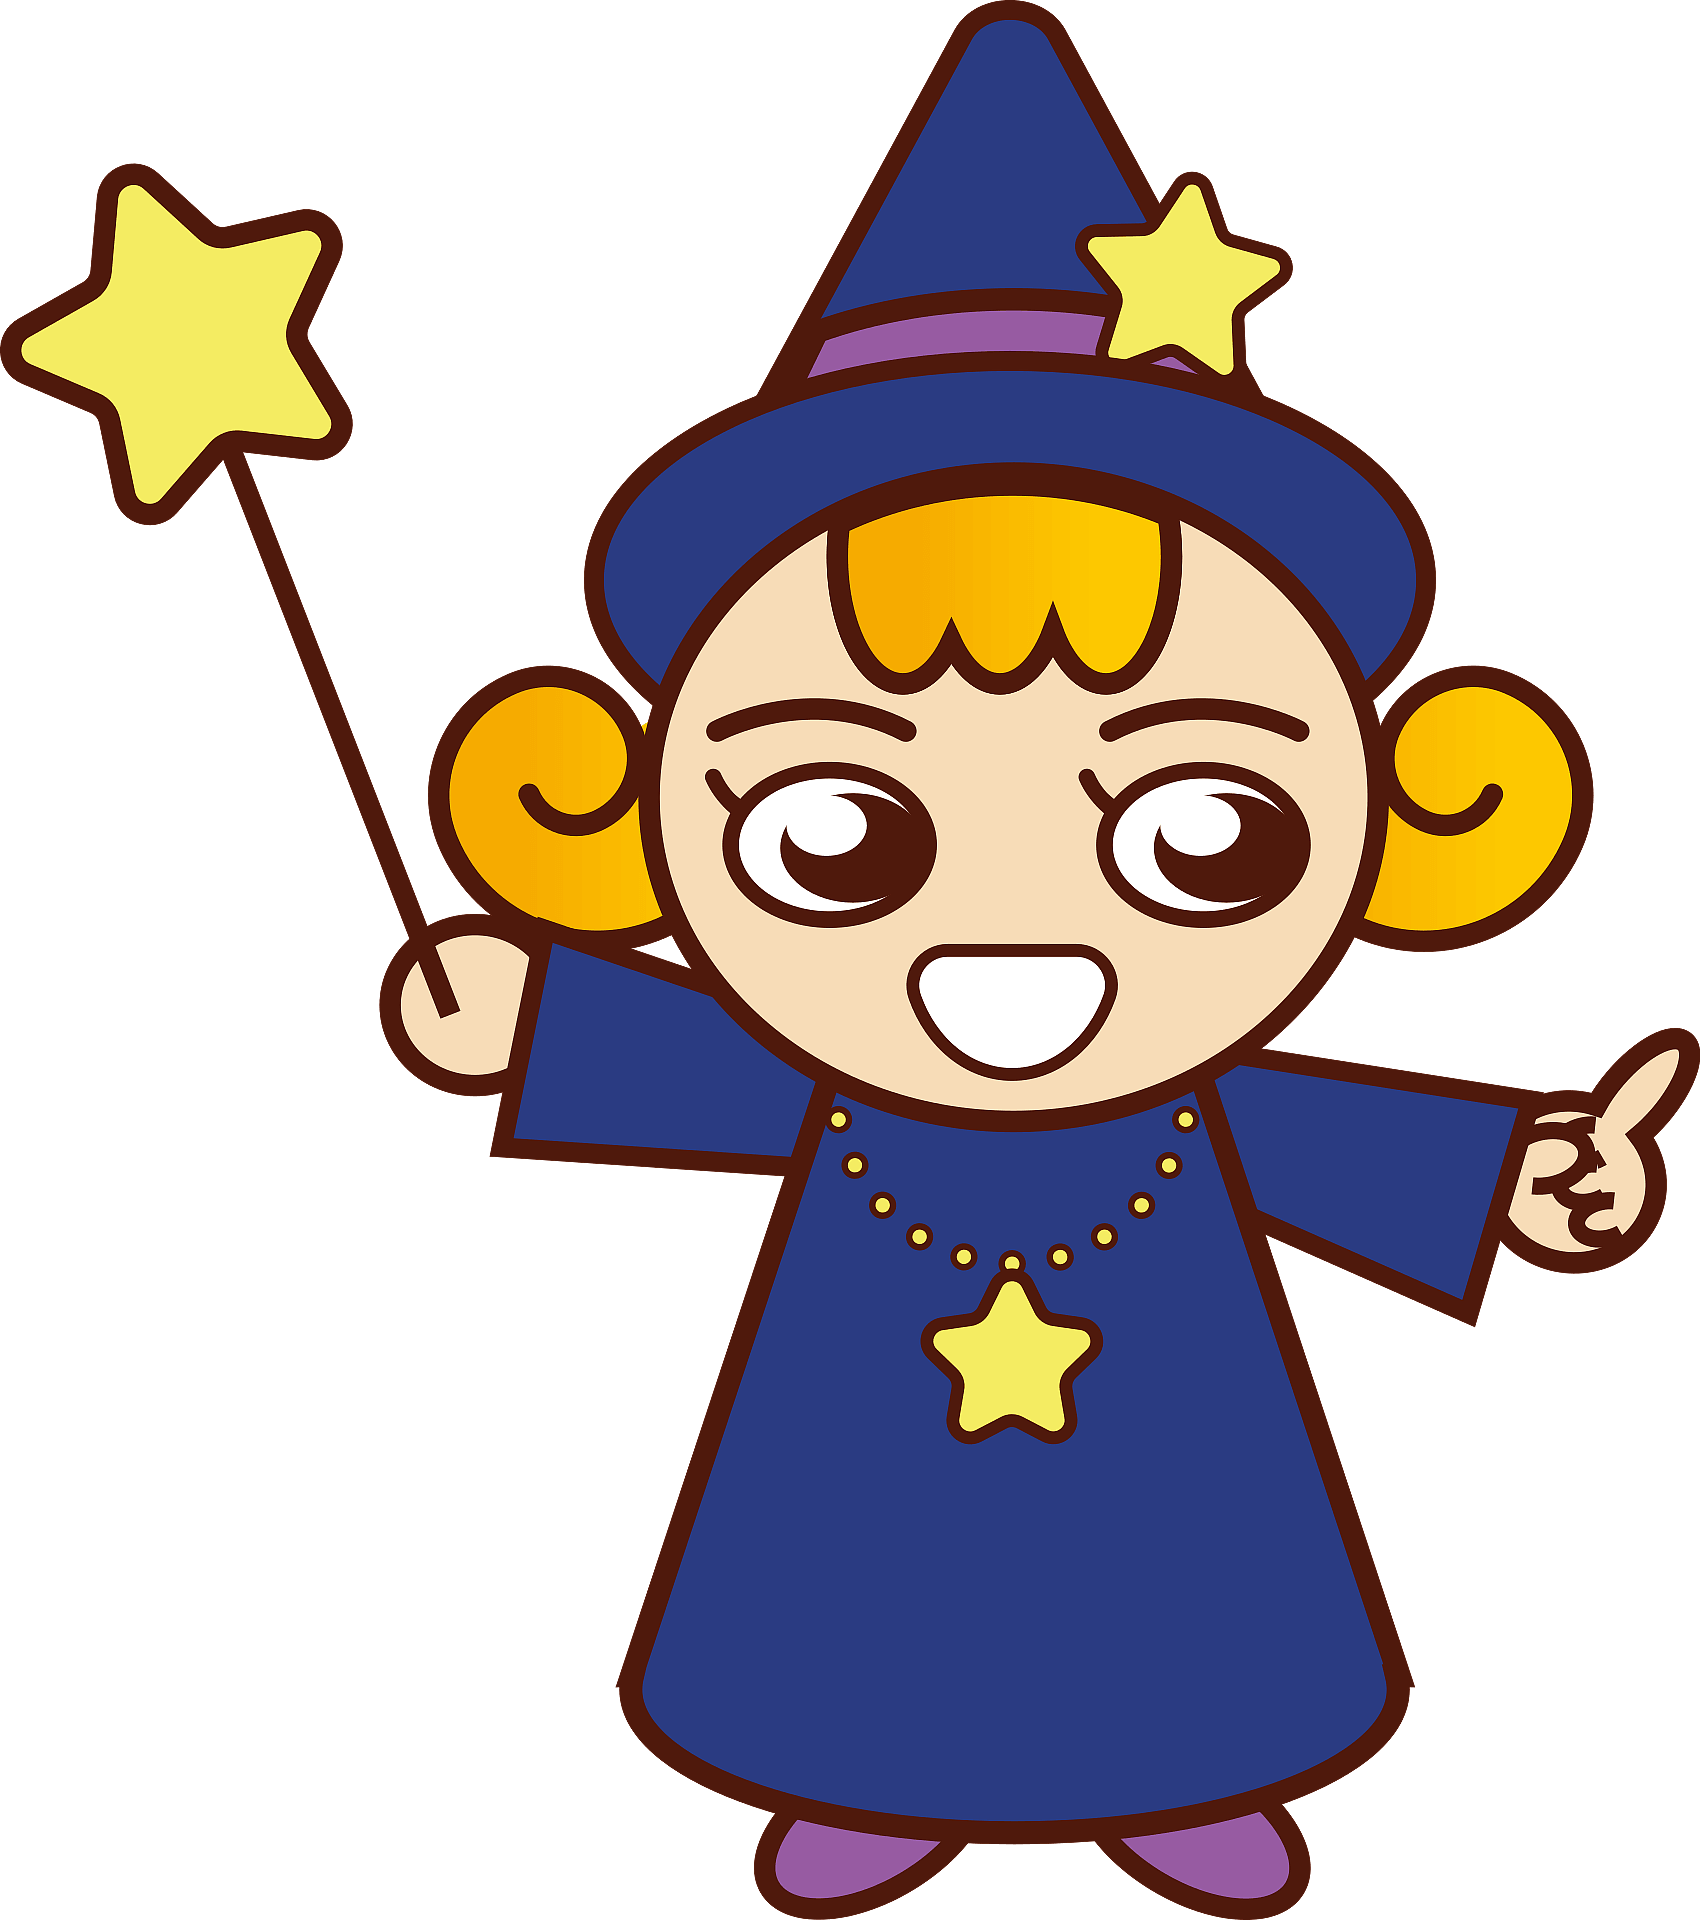 Wizard Illustrations and Clipart. 40,702 Wizard royalty free - Clip Art ...